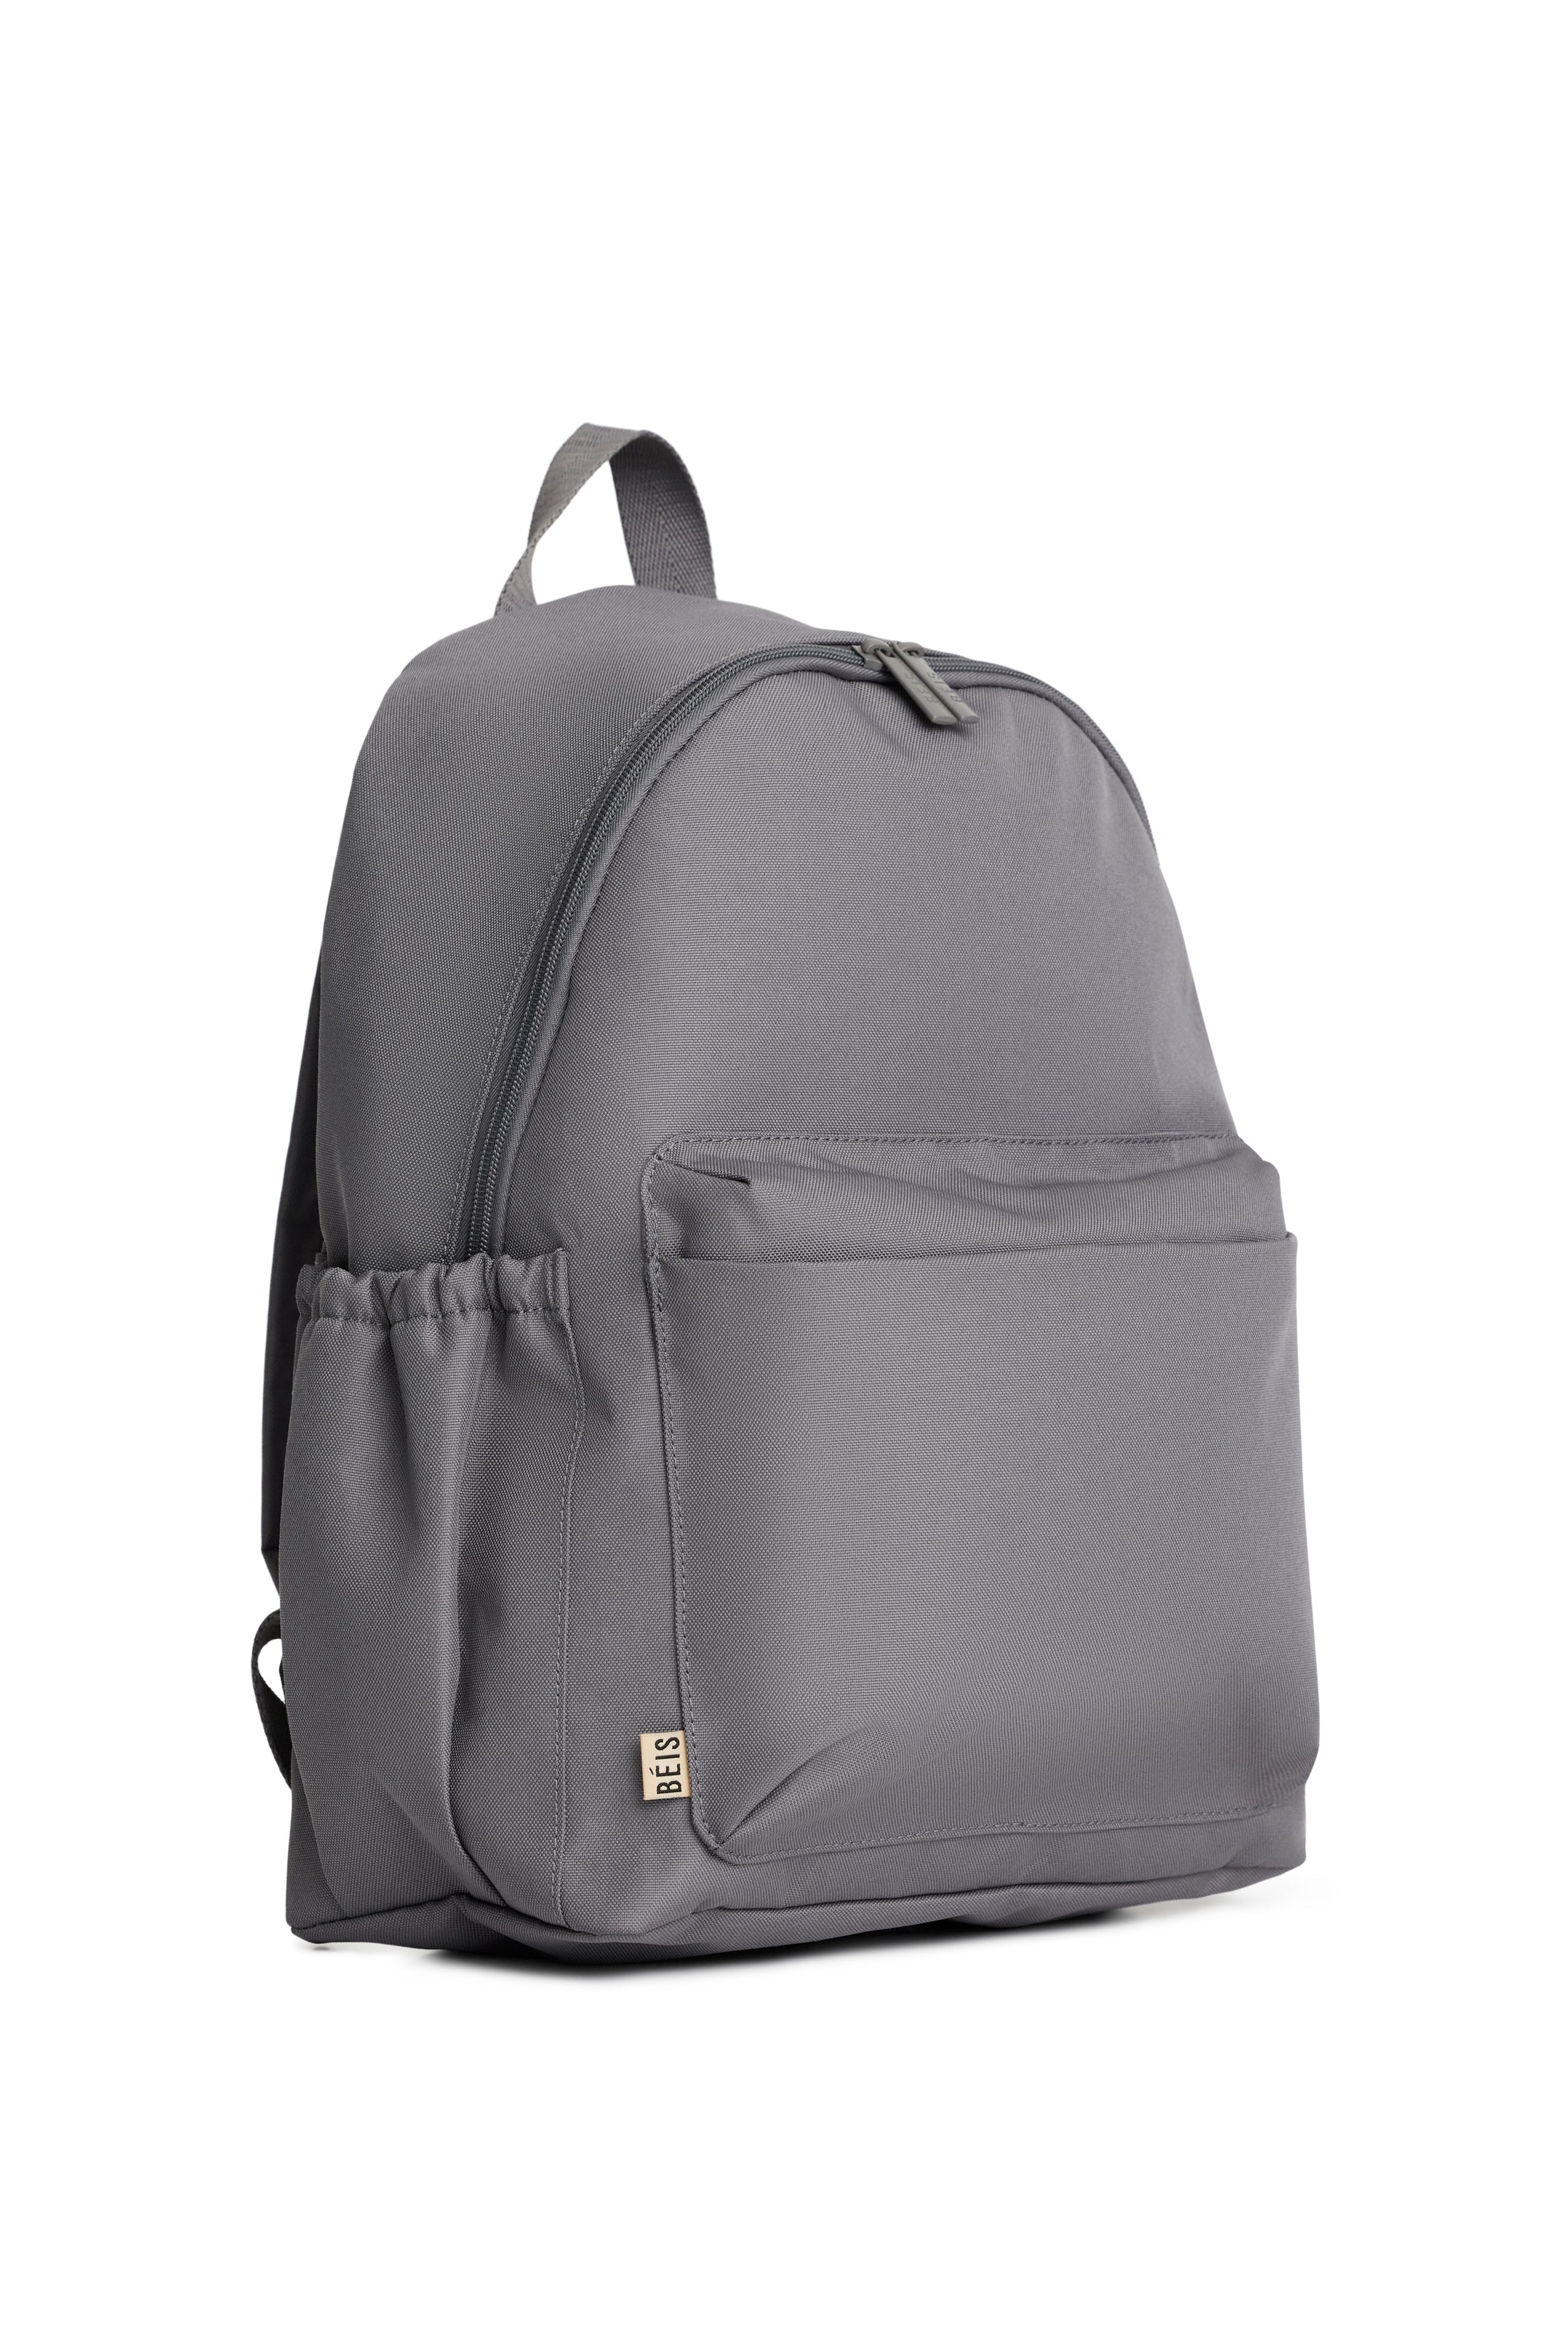 Béis 'The BEISICS Backpack' in Grey - Backpack For Work & Travel With ...